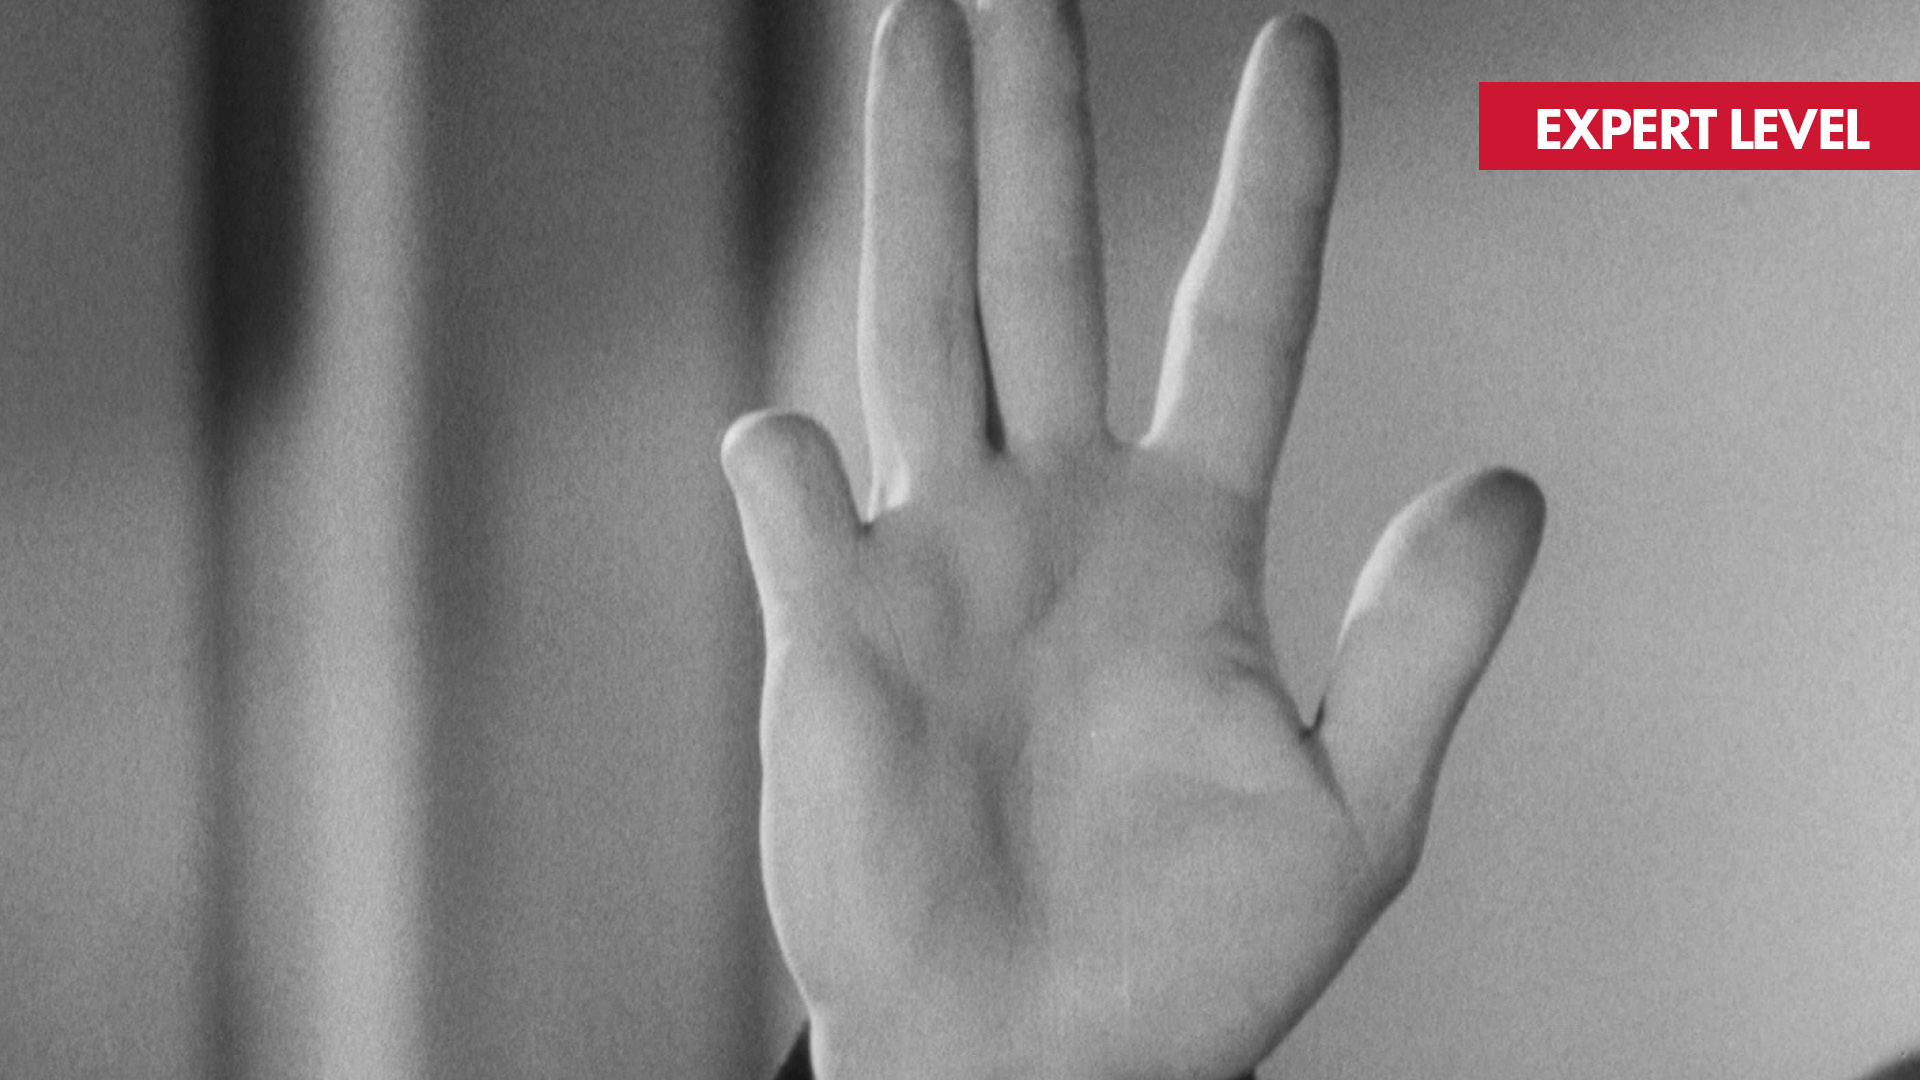 THE 39 STEPS film still of a hand missing the pinky finger